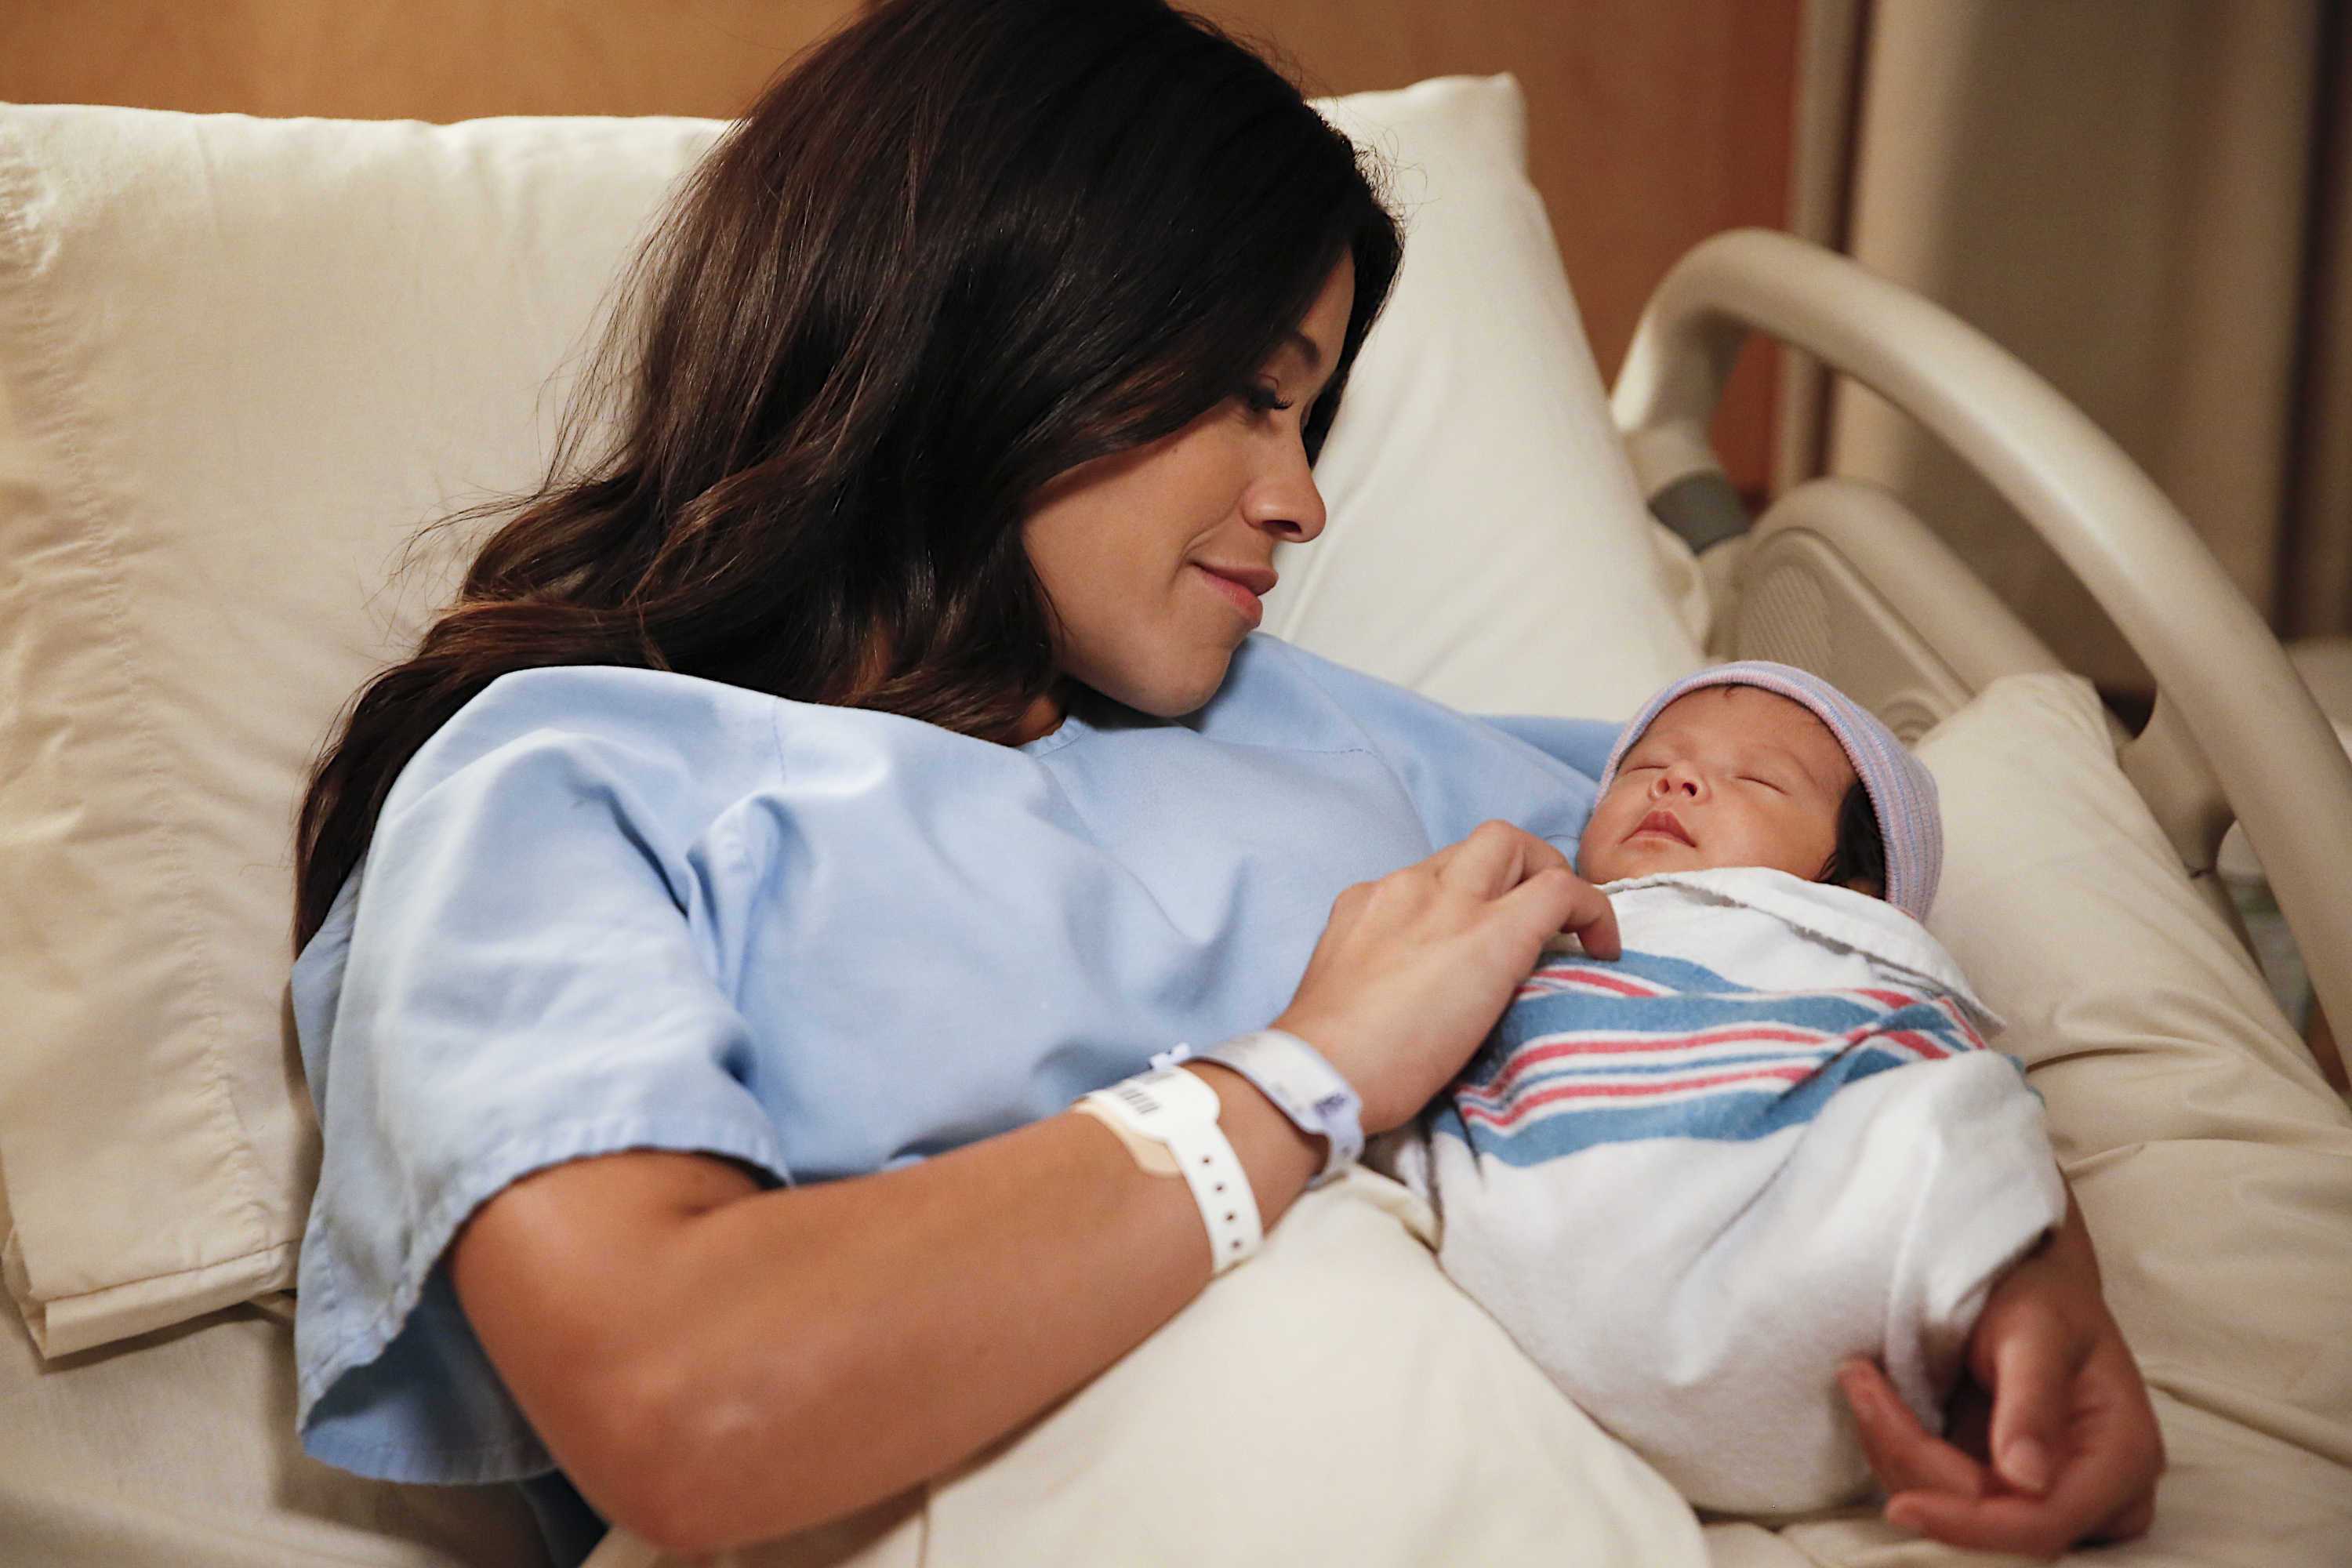 Gina Rodriguez is lying in a hospital bed, wearing a hospital gown, and smiling warmly while holding a newborn baby wrapped in a striped blanket